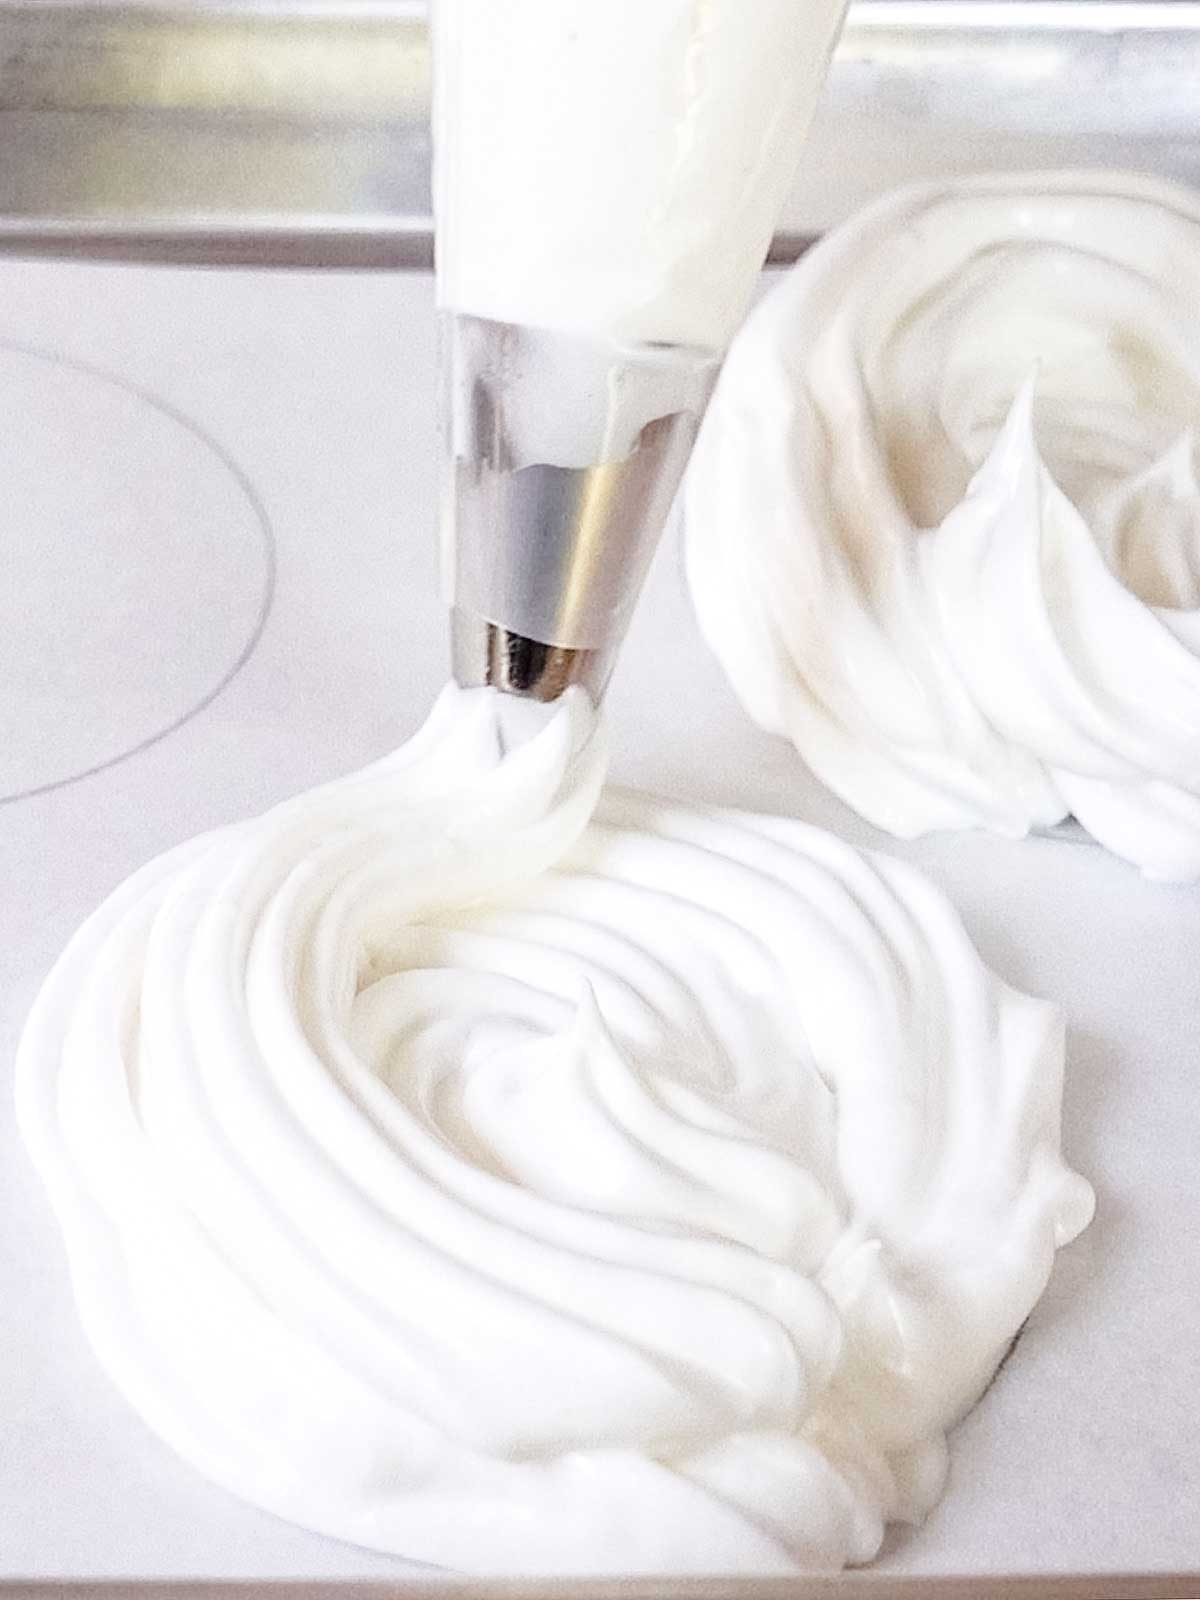 Piping the meringue to form the shells.